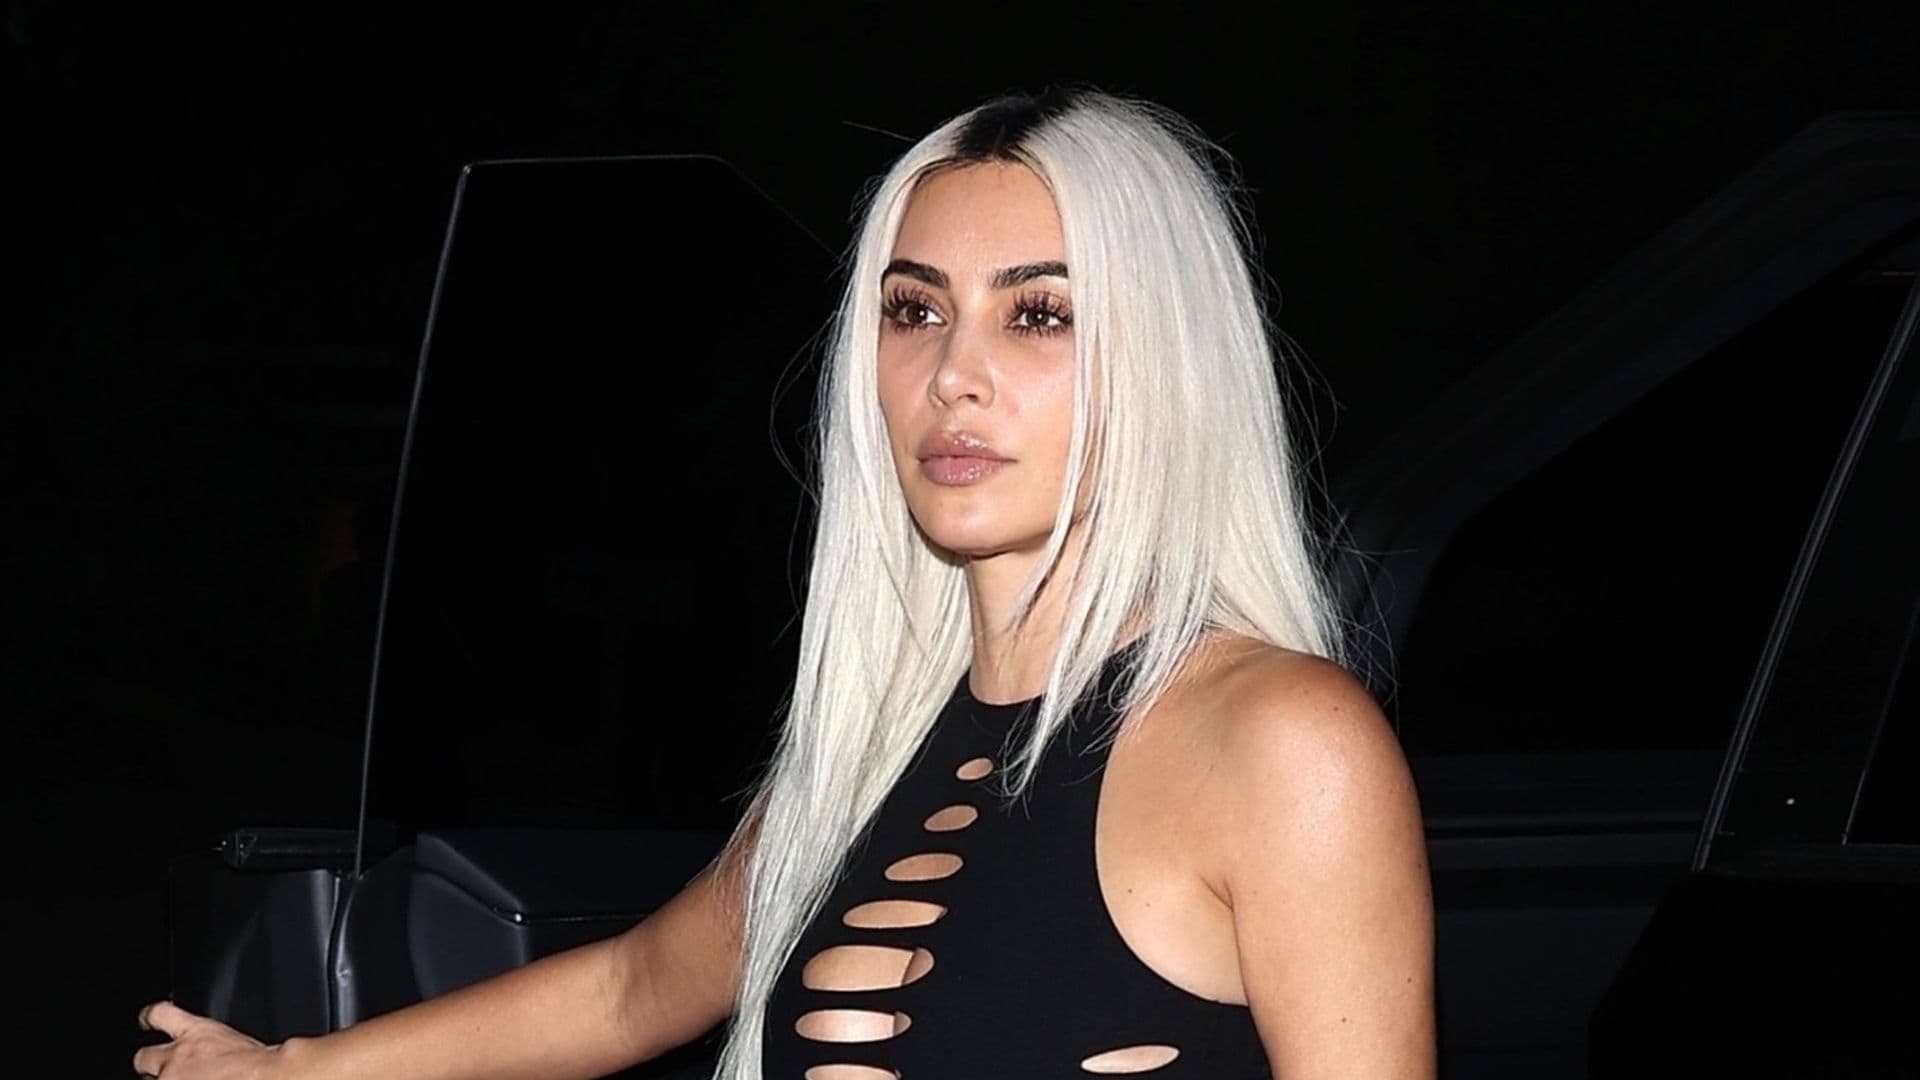 Why Kim Kardashian thinks she only has '10 years' to 'look good': 'That's all I've got in me'